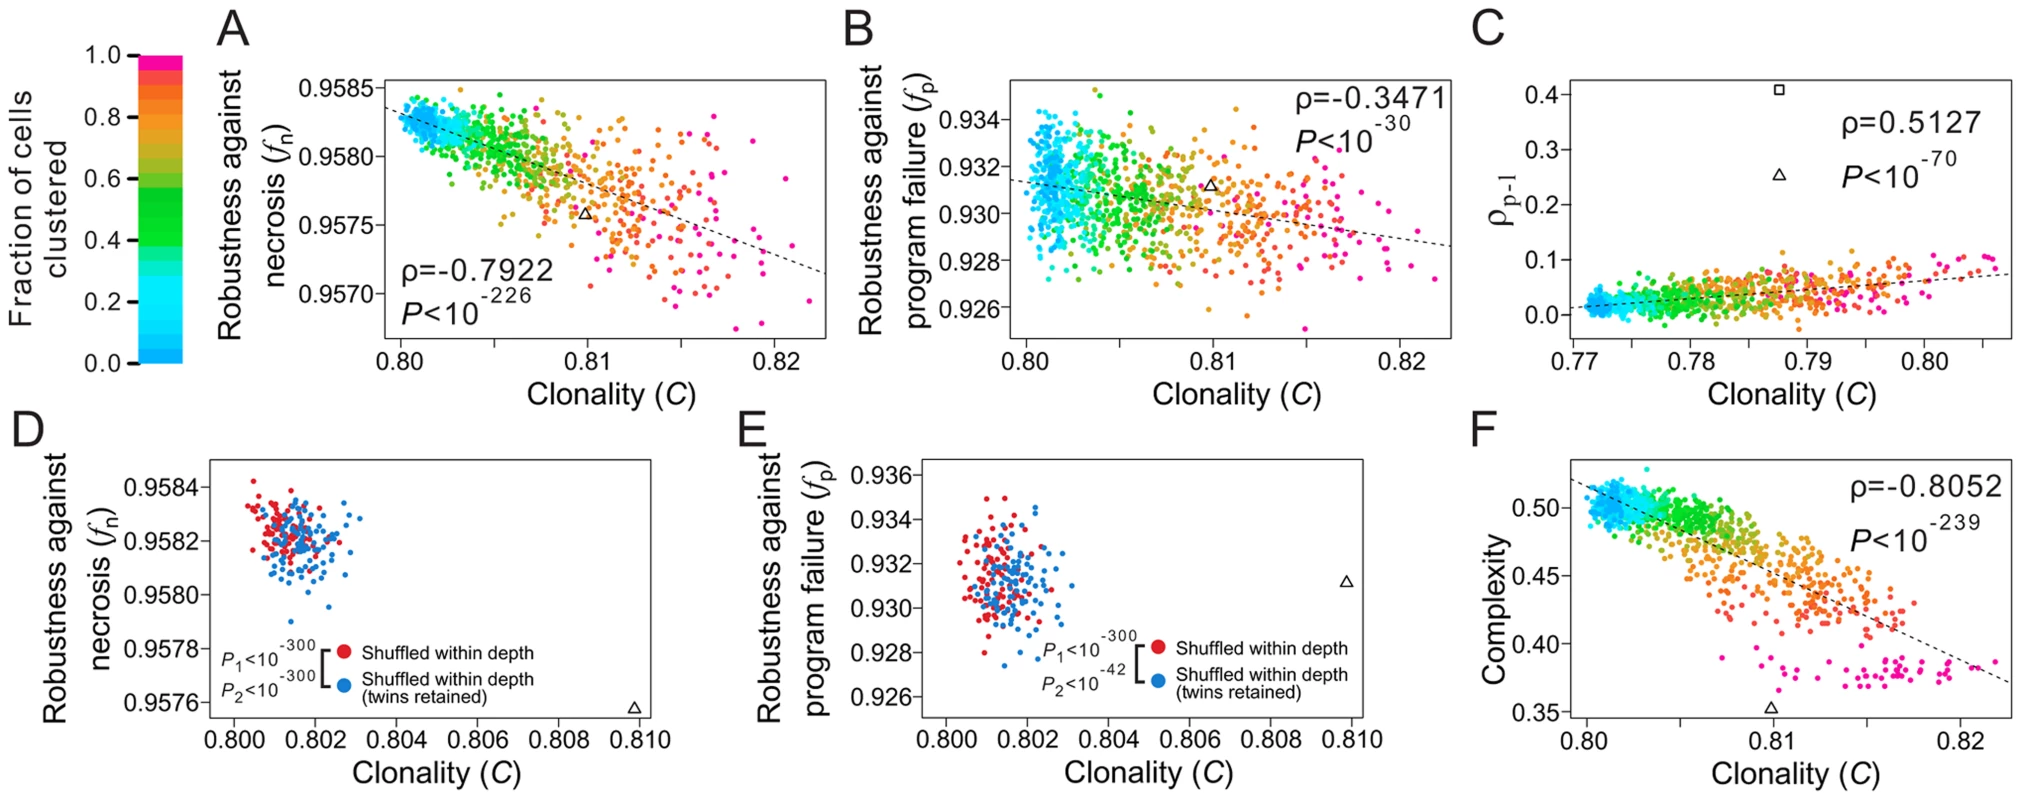 Non-clonality of cell types contributes to the robustness of the <i>C. elegans</i> lineage.